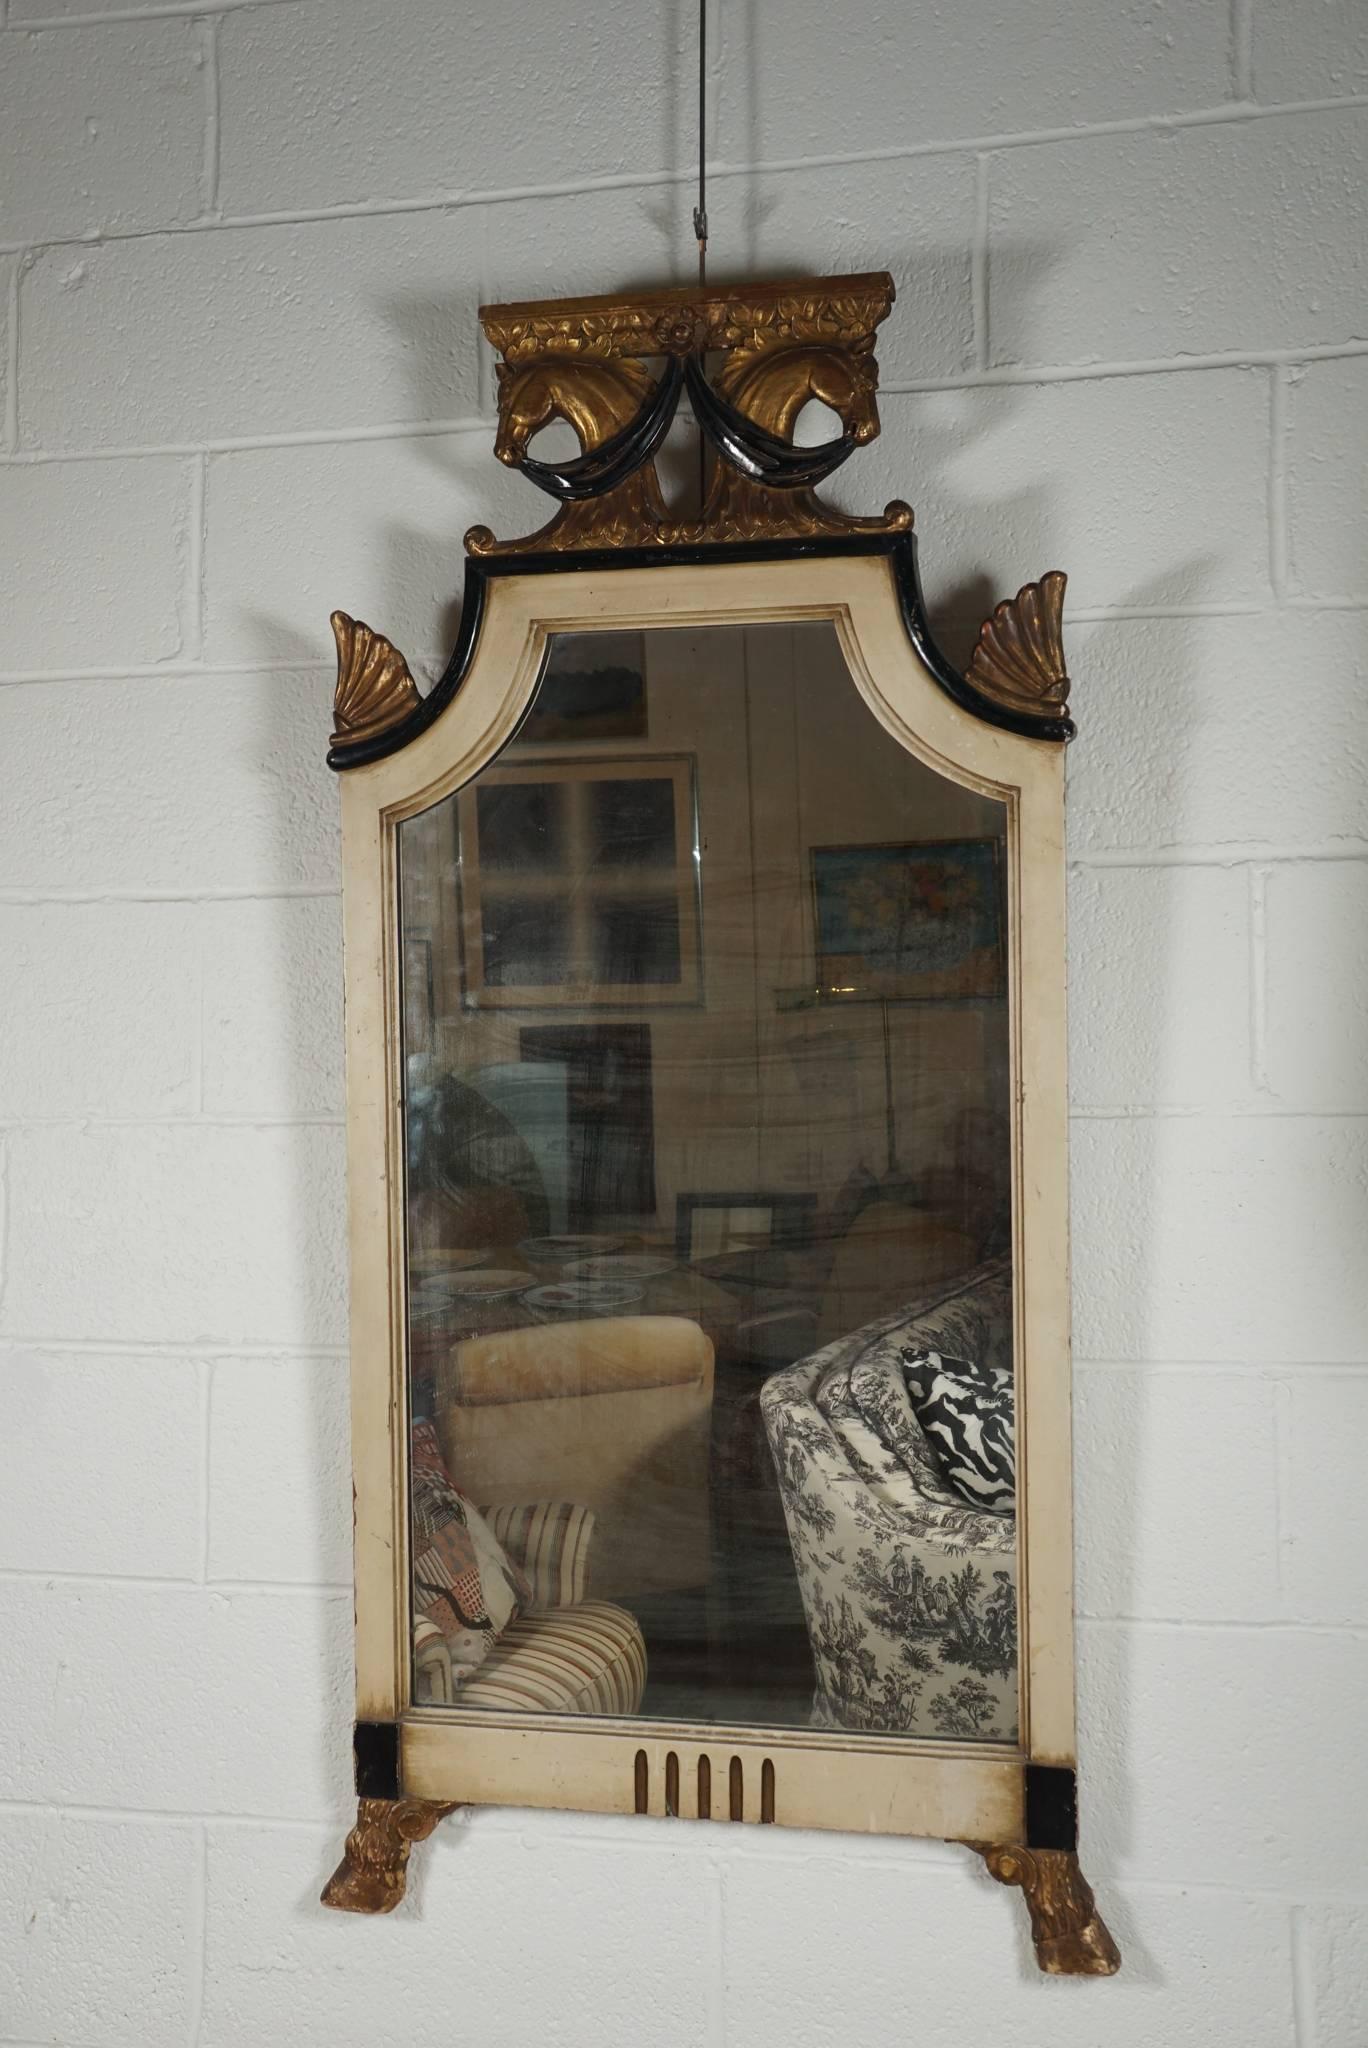 Here is a great Regency style mirror with a unique double horse head finial. The horse head motif is reflected in the footed hooves base.
The mirror is painted while the ornamented features are gilded.